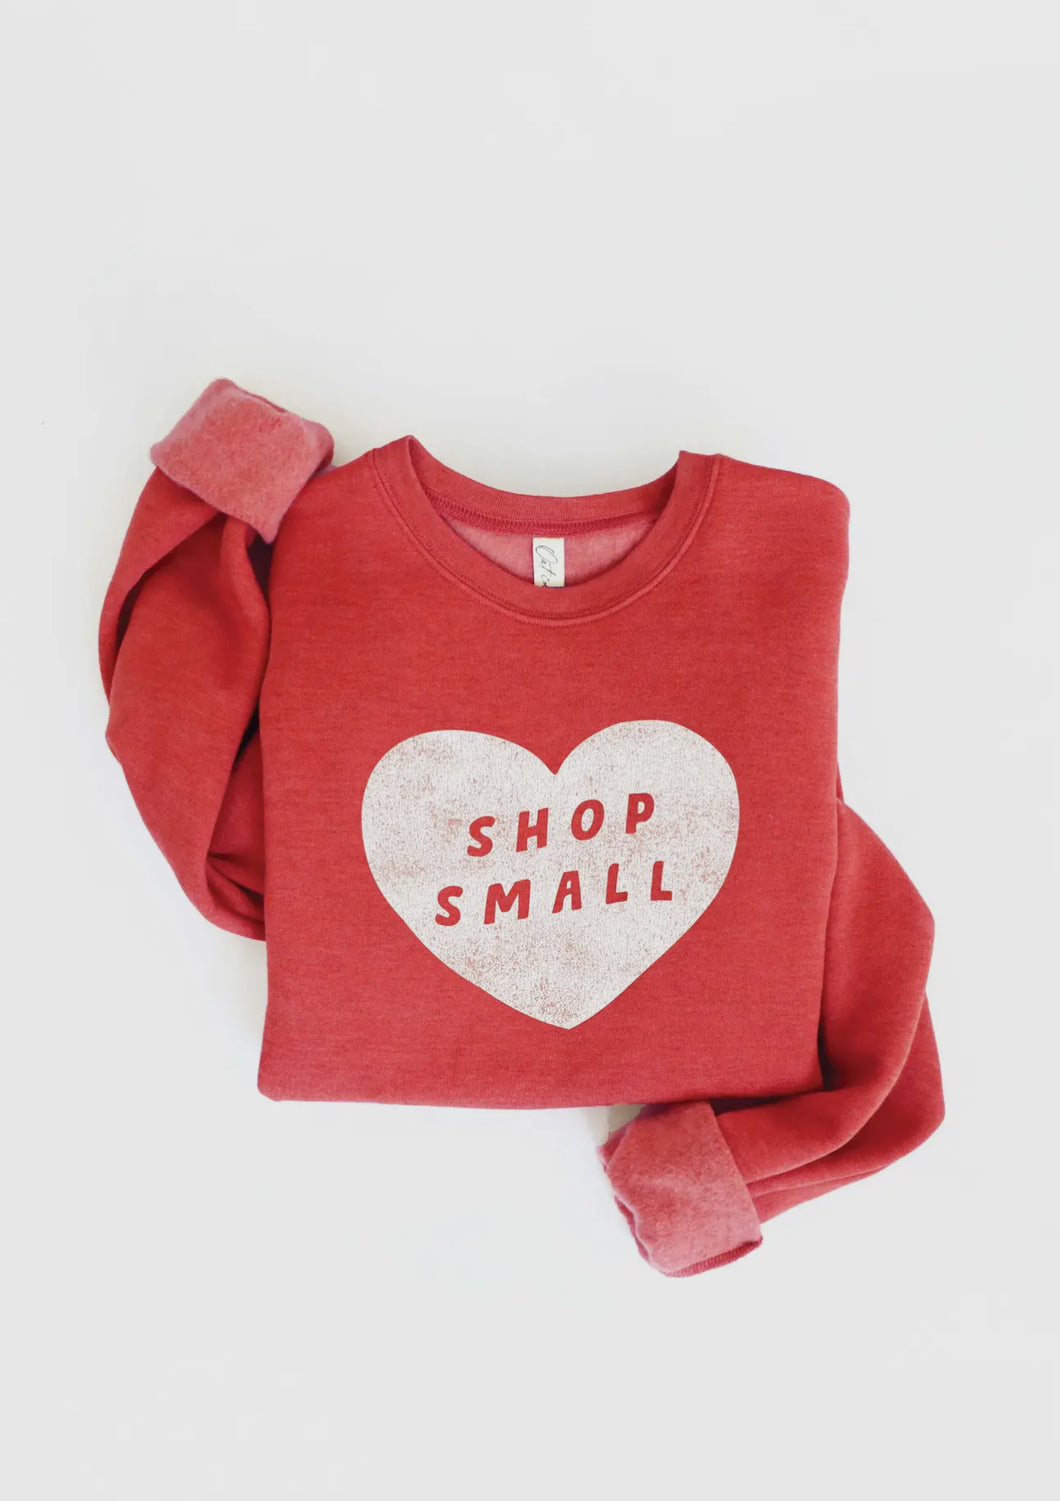 Shop Small—super soft collection